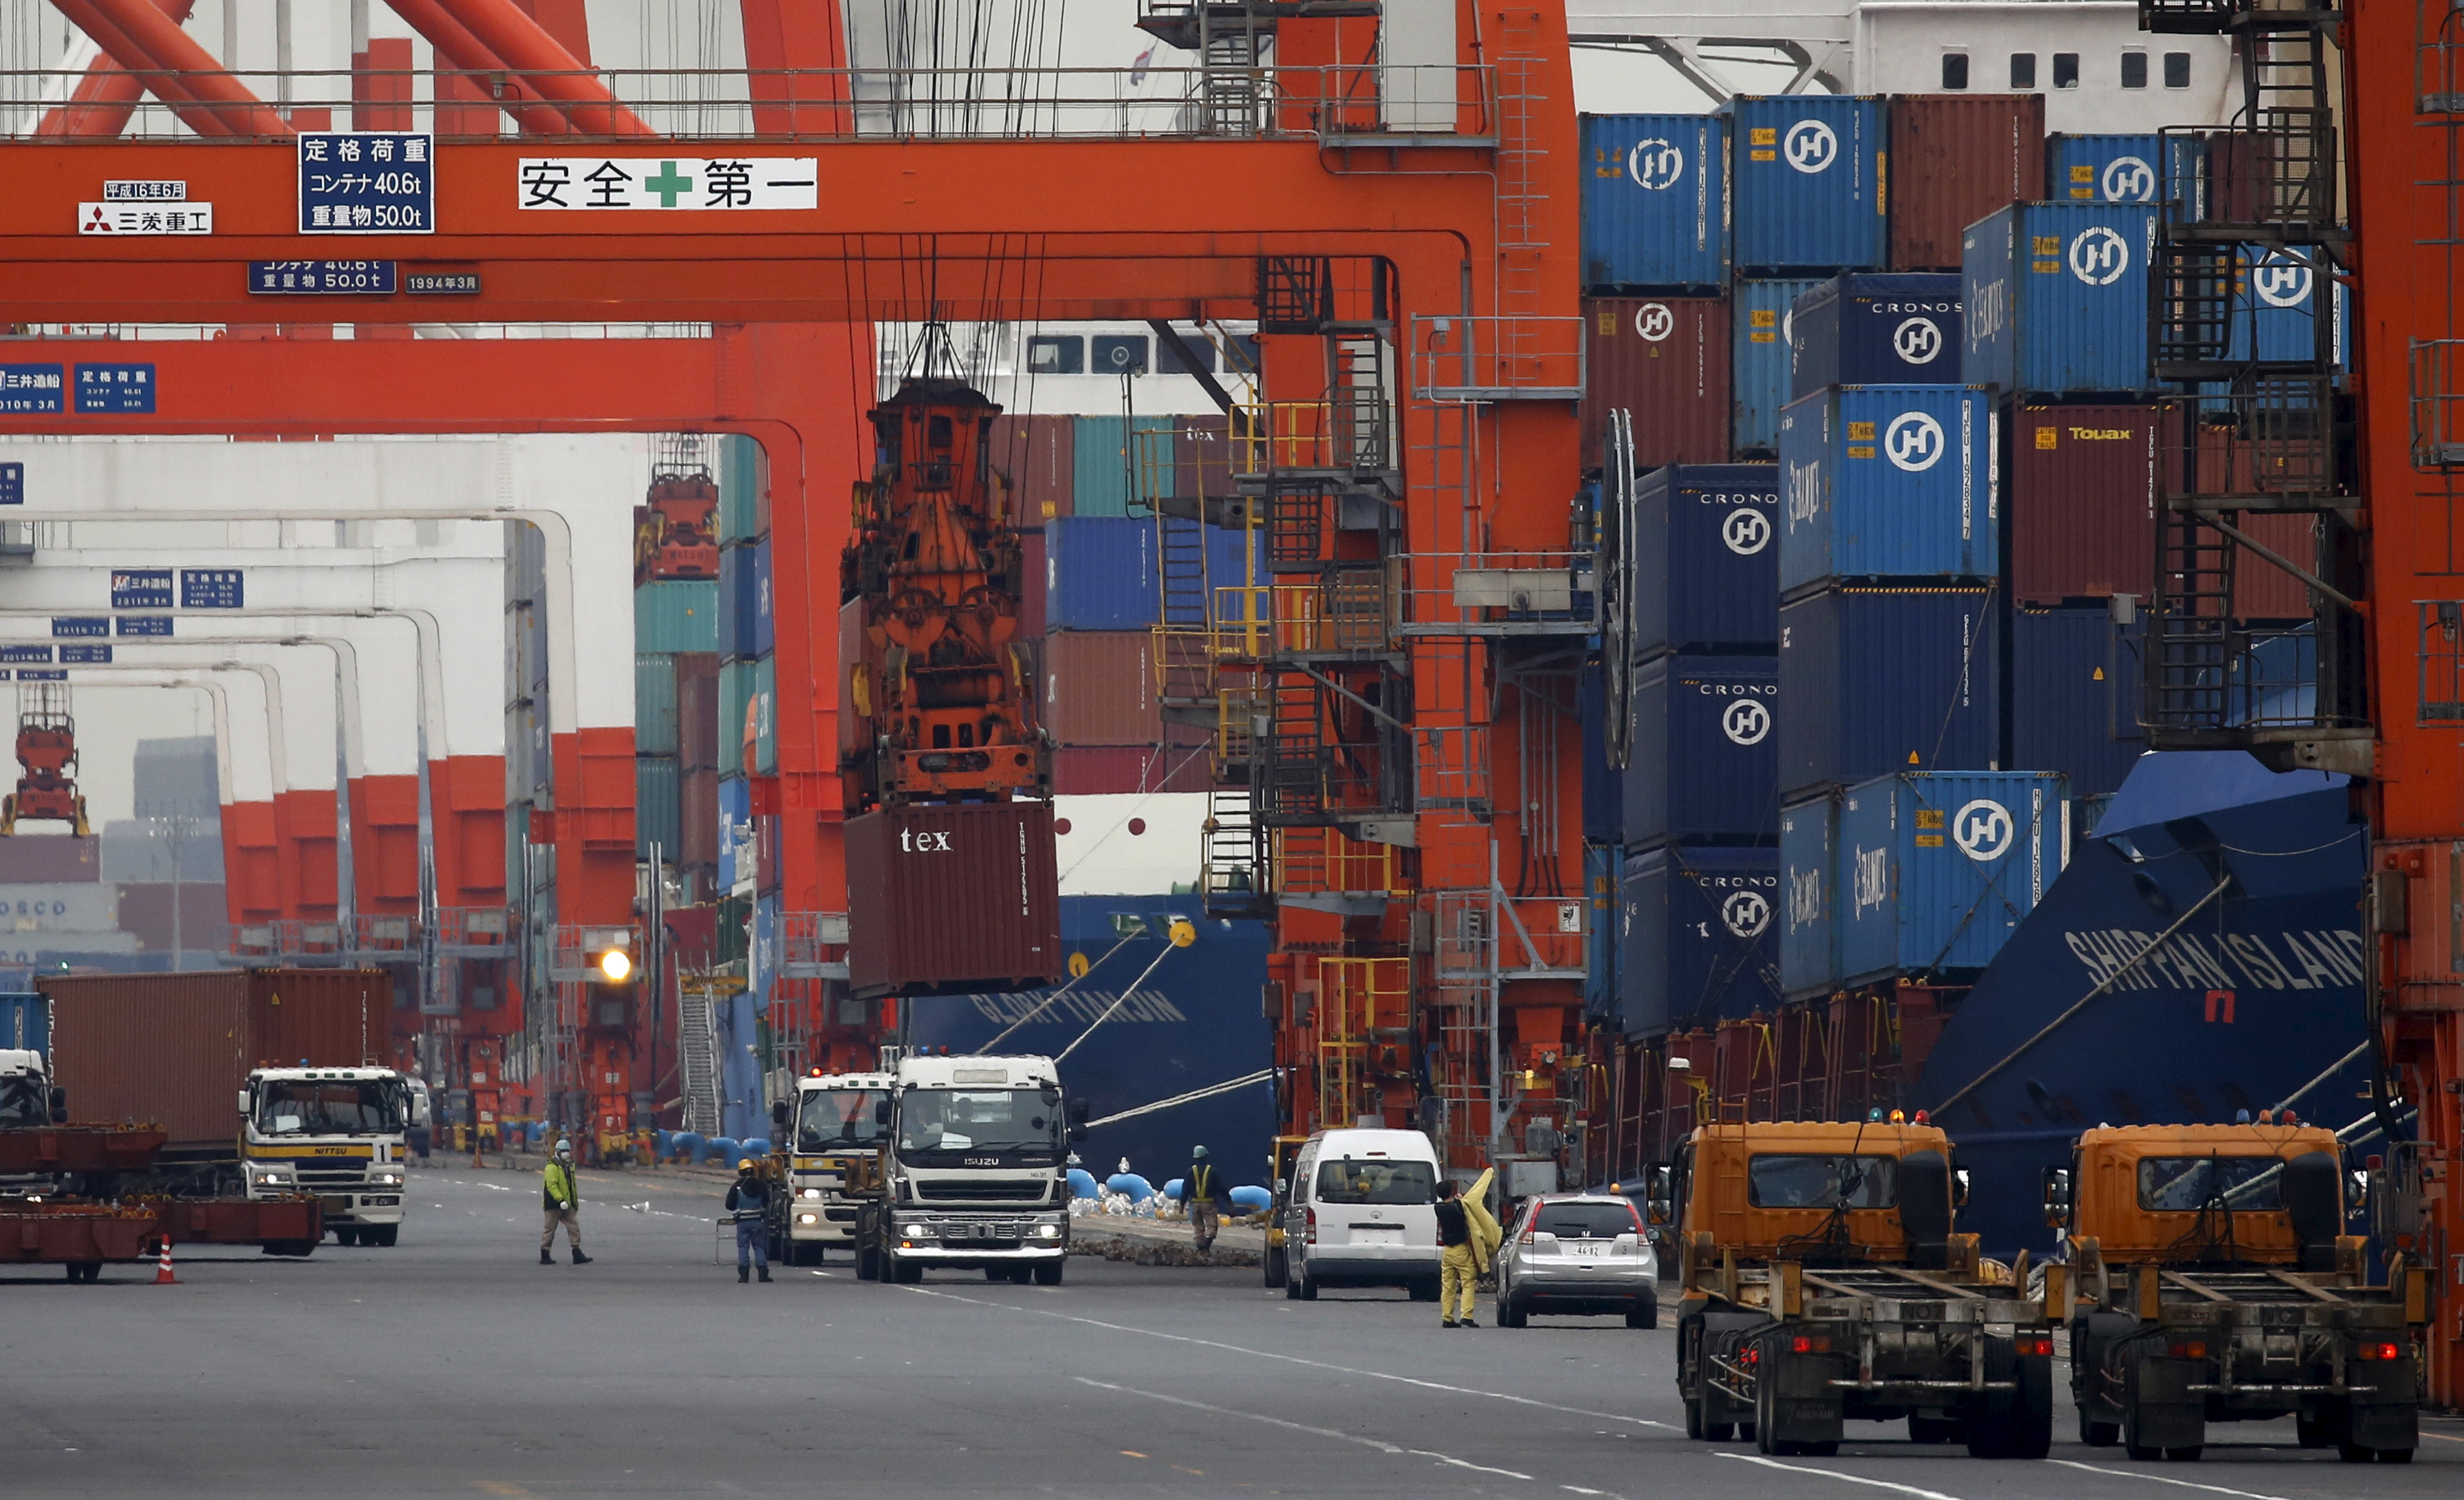 Workers load containers onto trucks from a cargo ship at a port in Tokyo